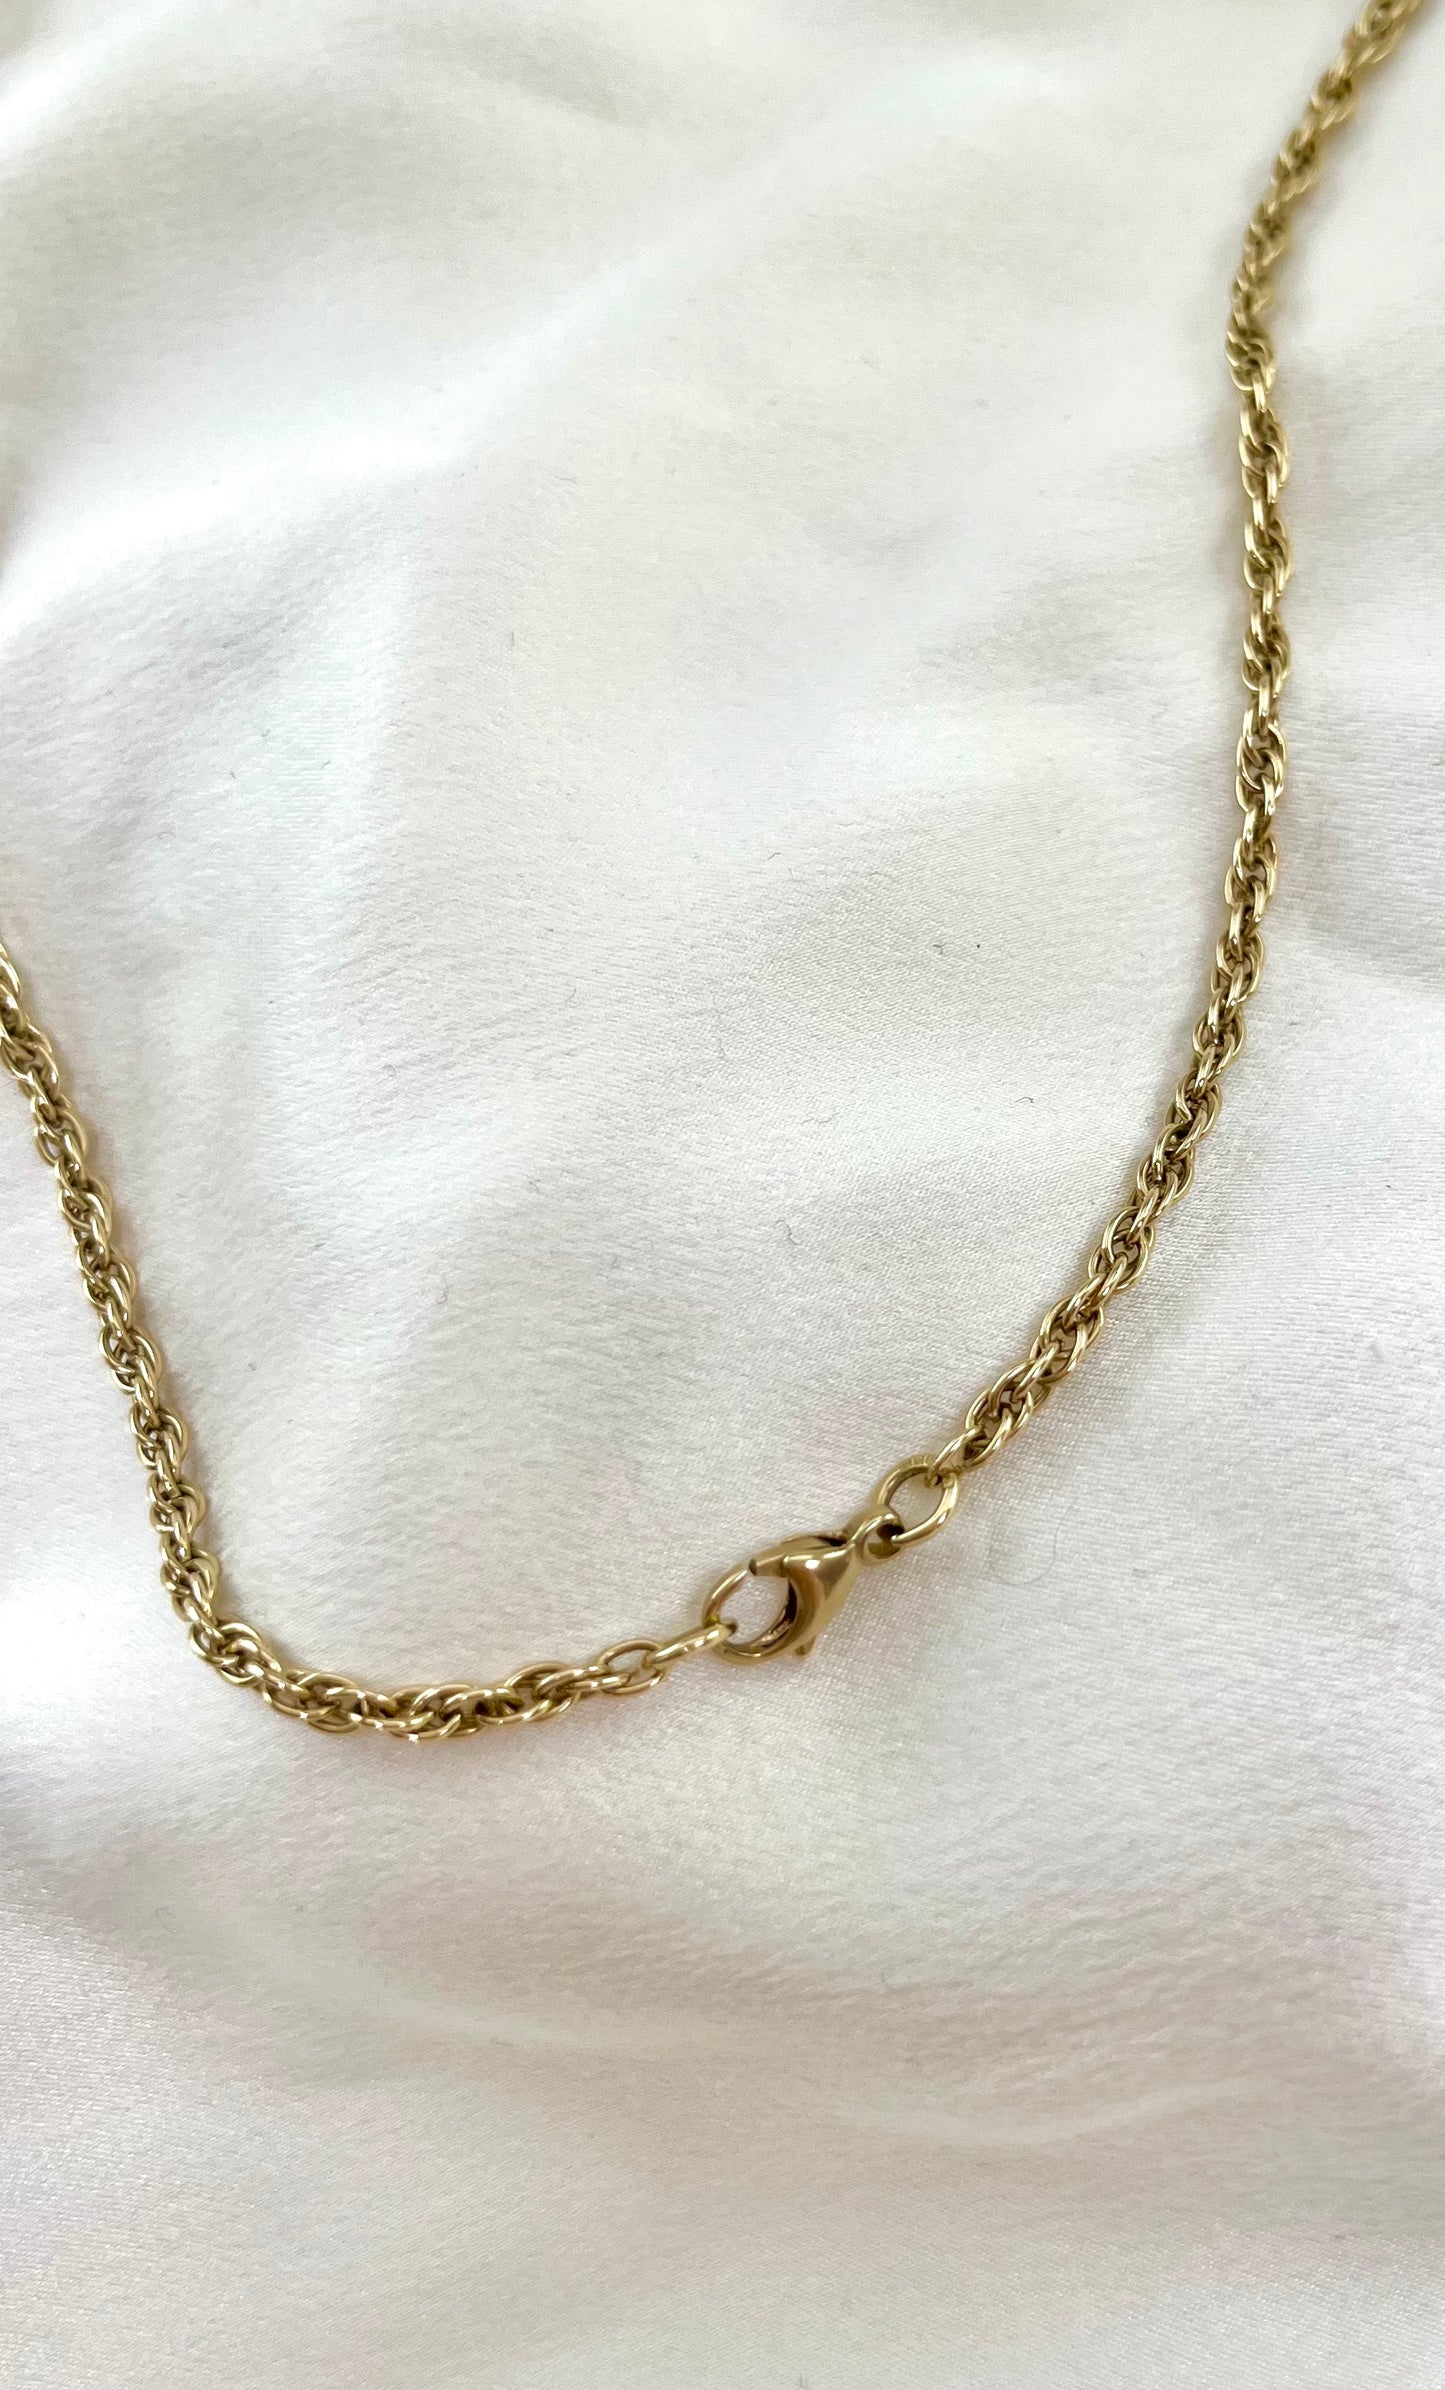 9ct Gold Long Rope Link Necklace Vintage, Heavy 20 inch